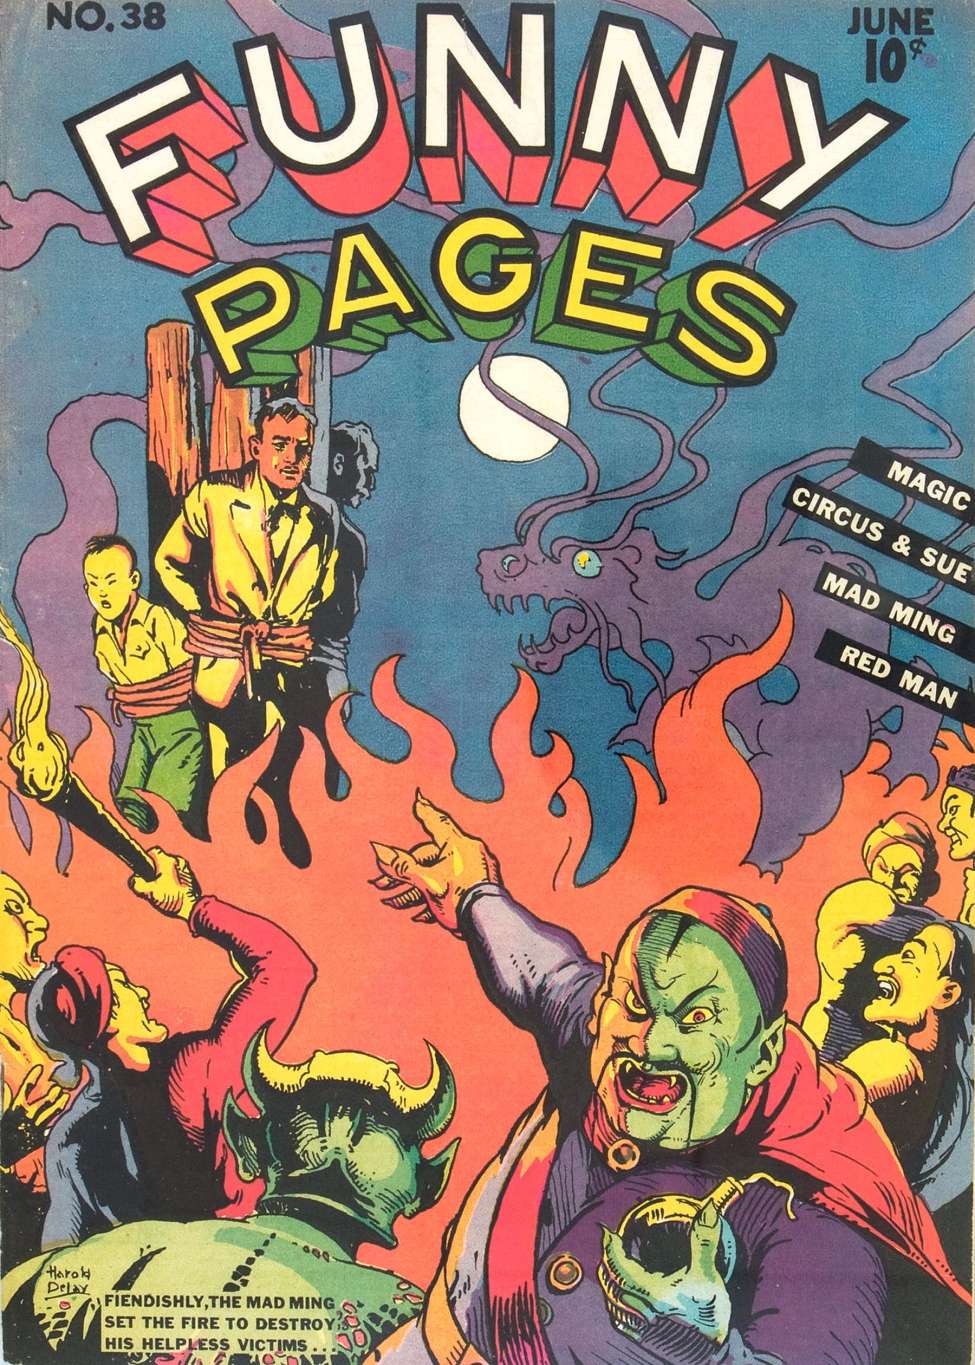 Comic Book Cover For Funny Pages v4 4 (38)